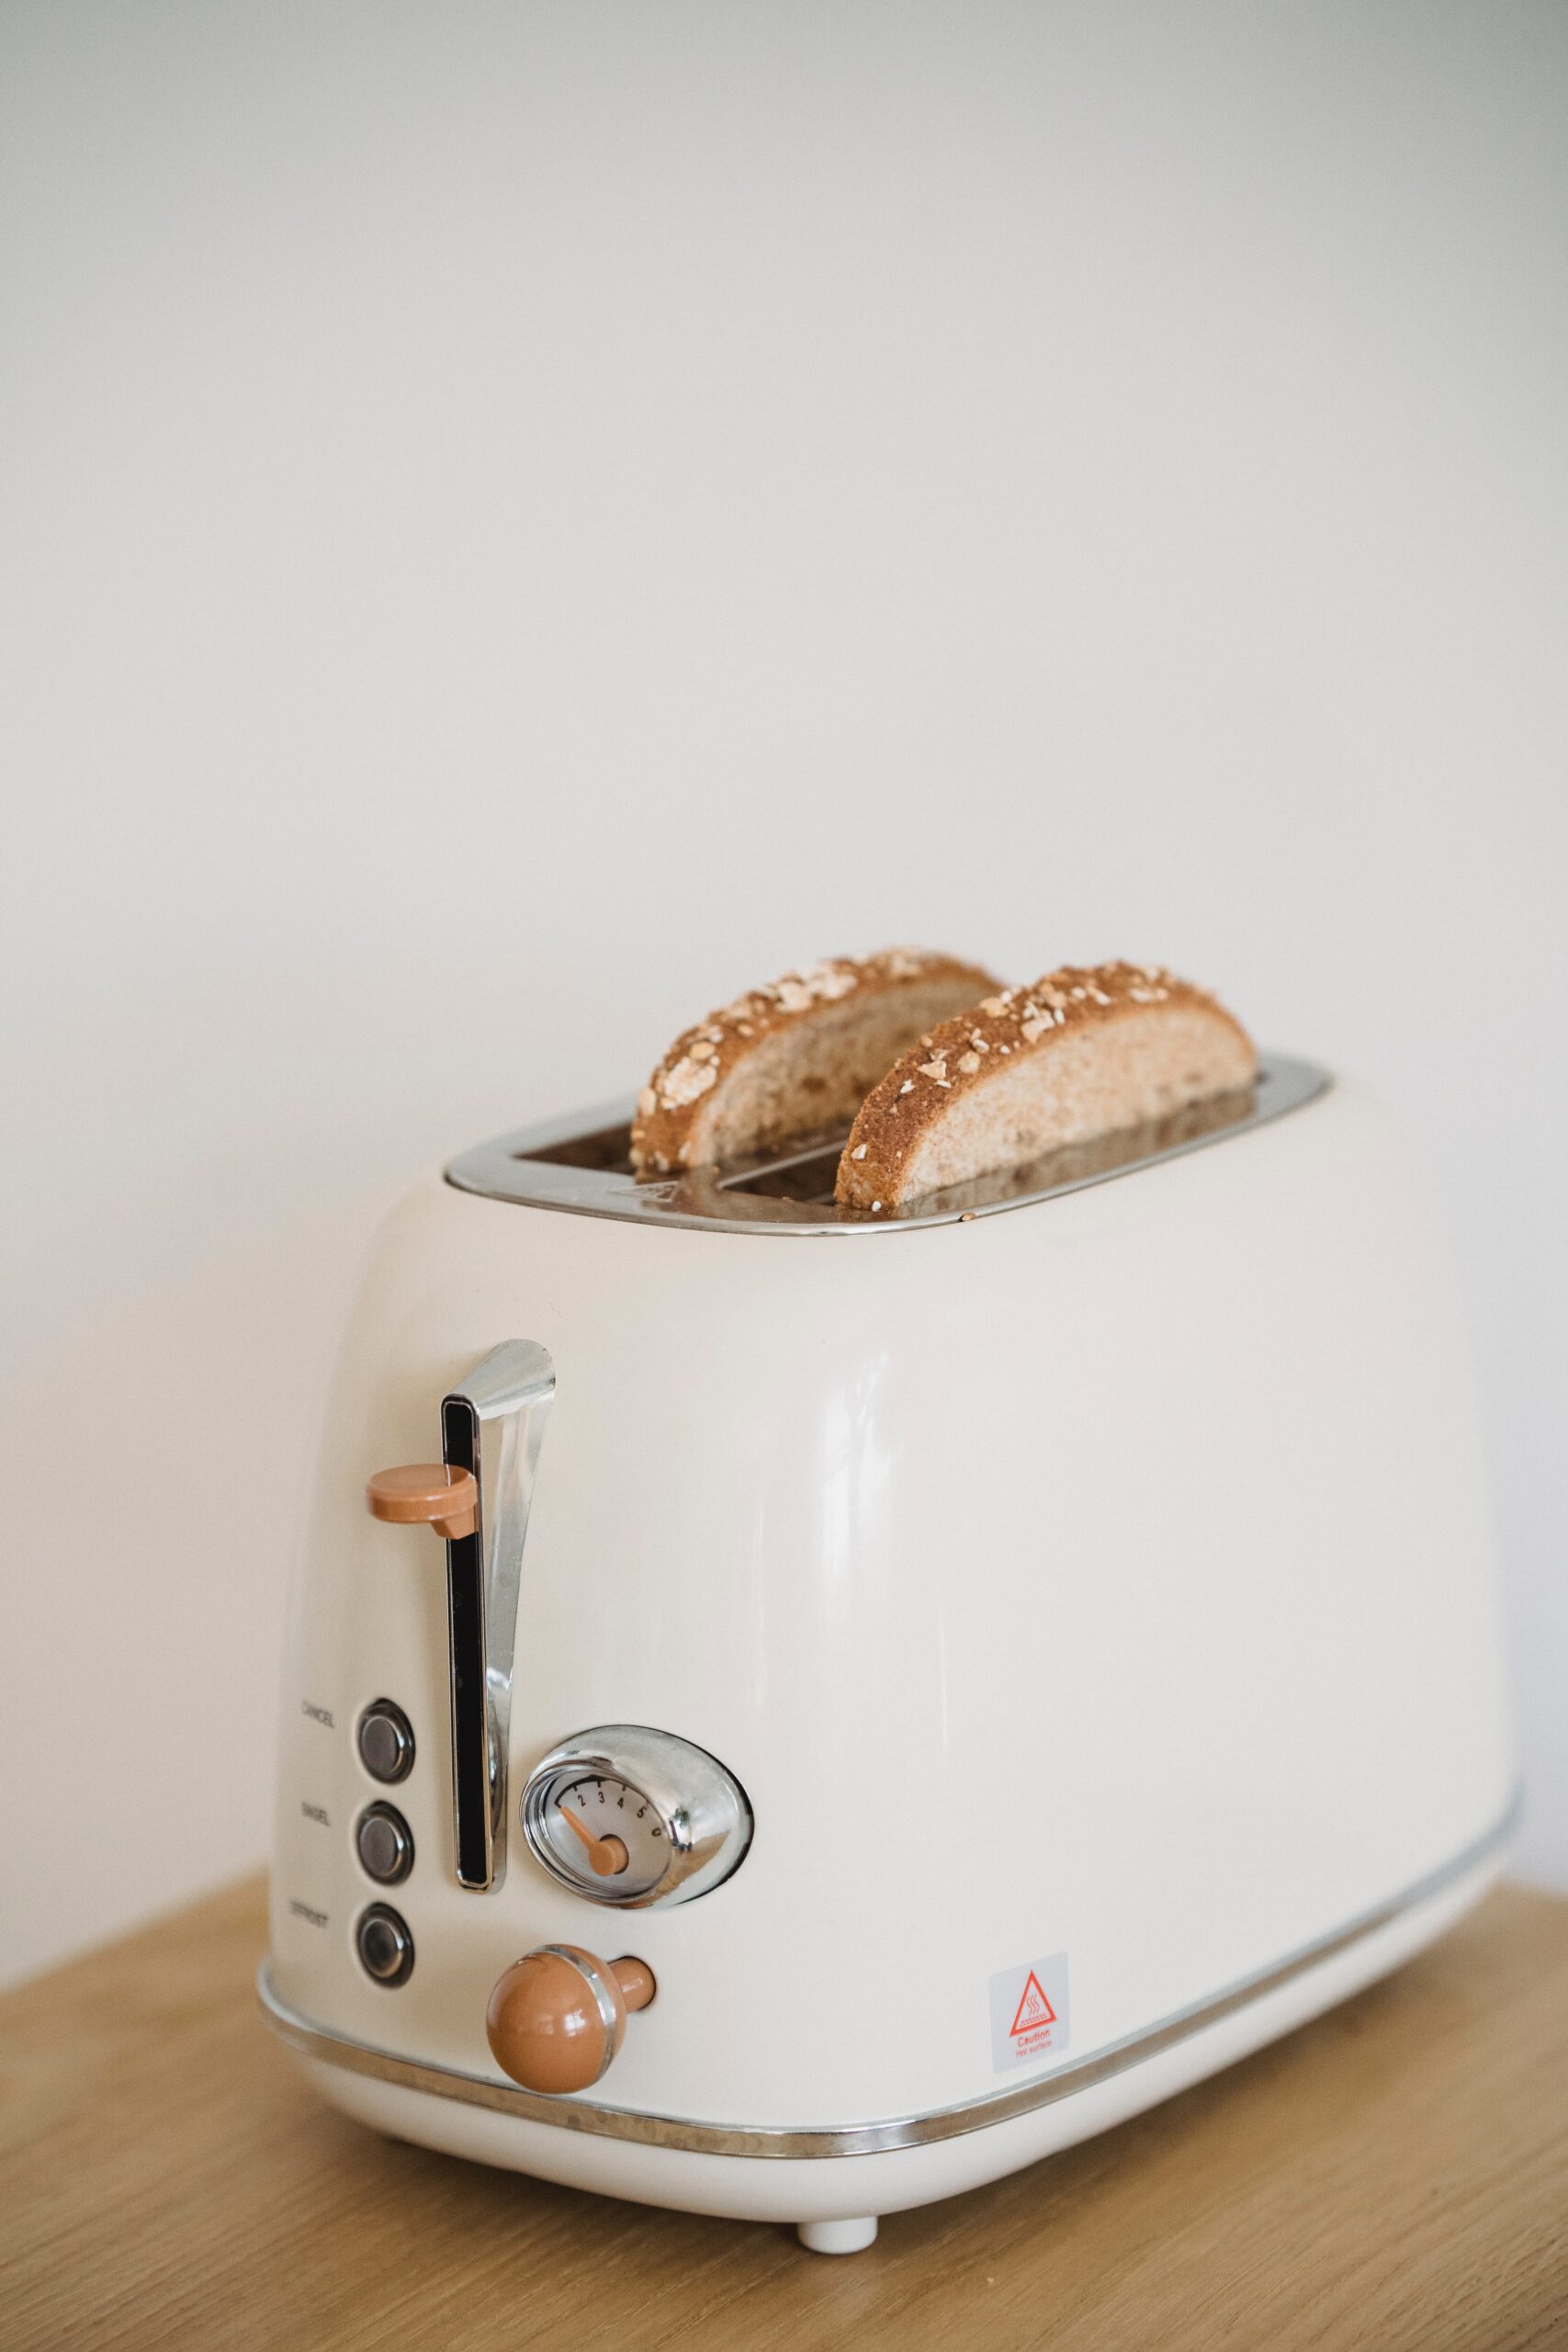 How to Pick the Right Toaster